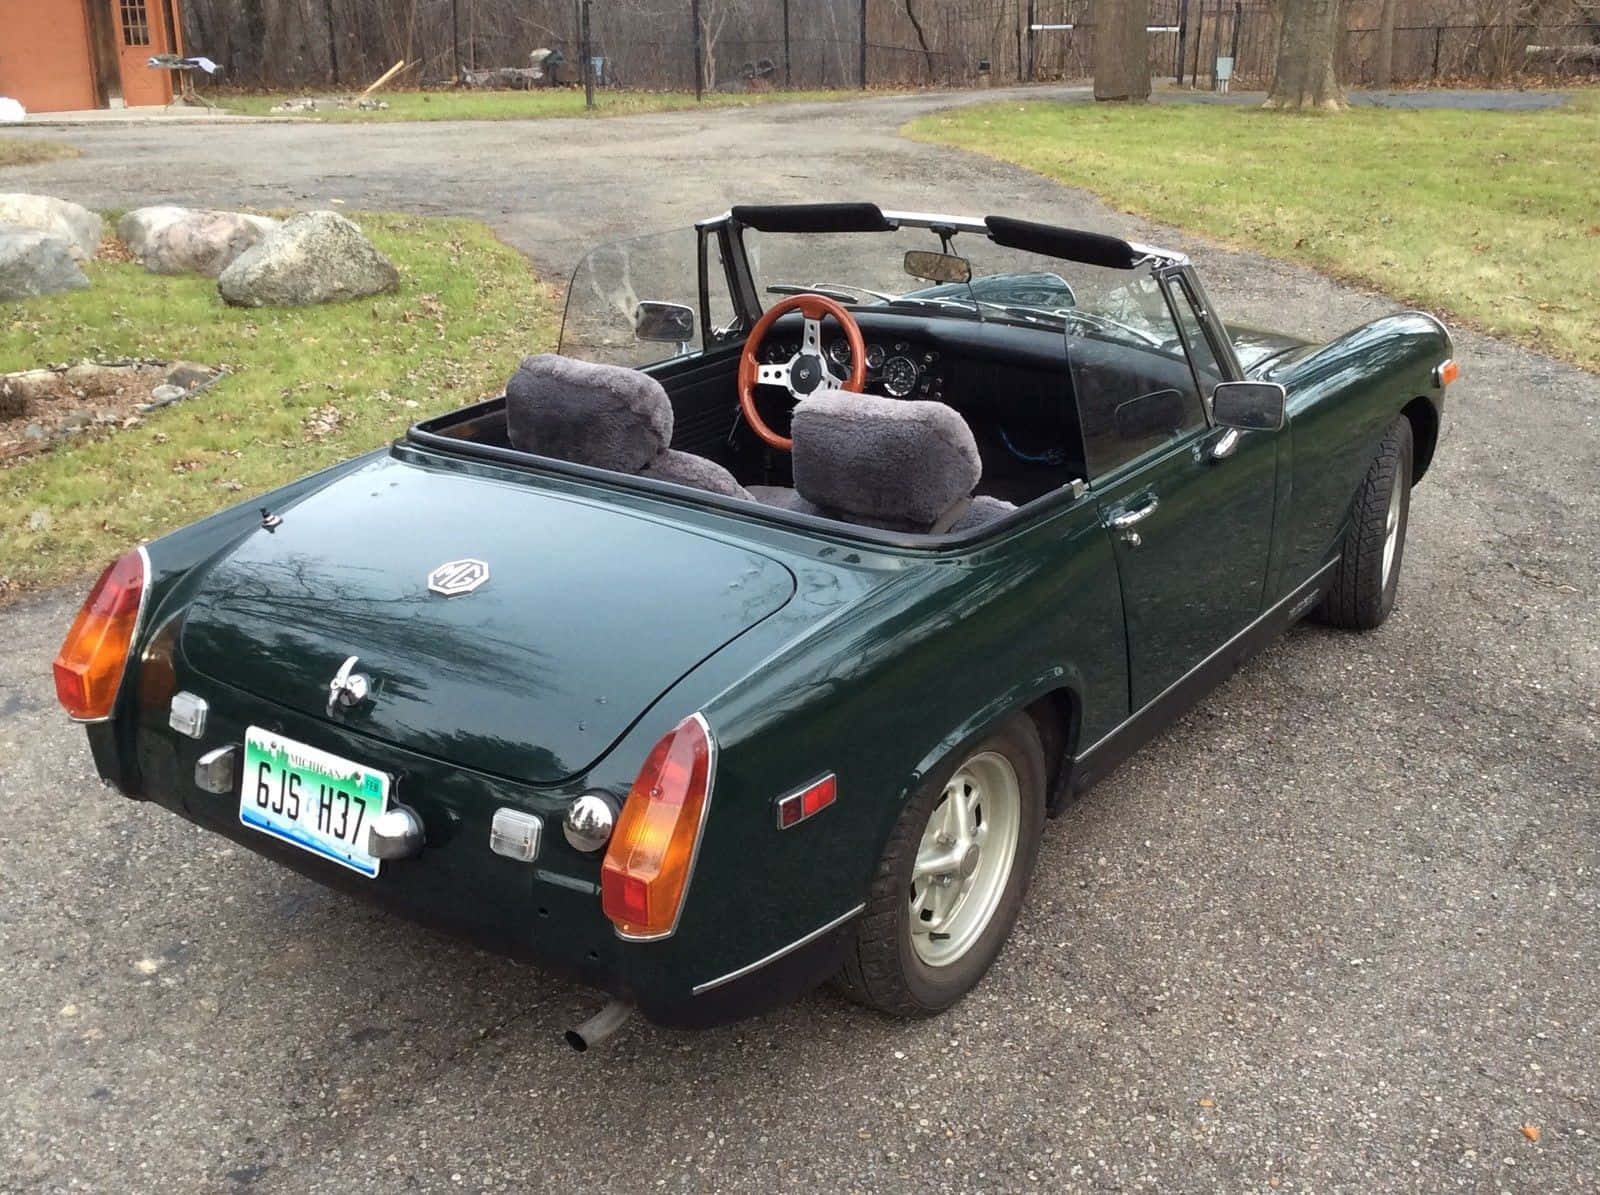 A Beautifully Restored Mg Midget In The Great Outdoors. Wallpaper